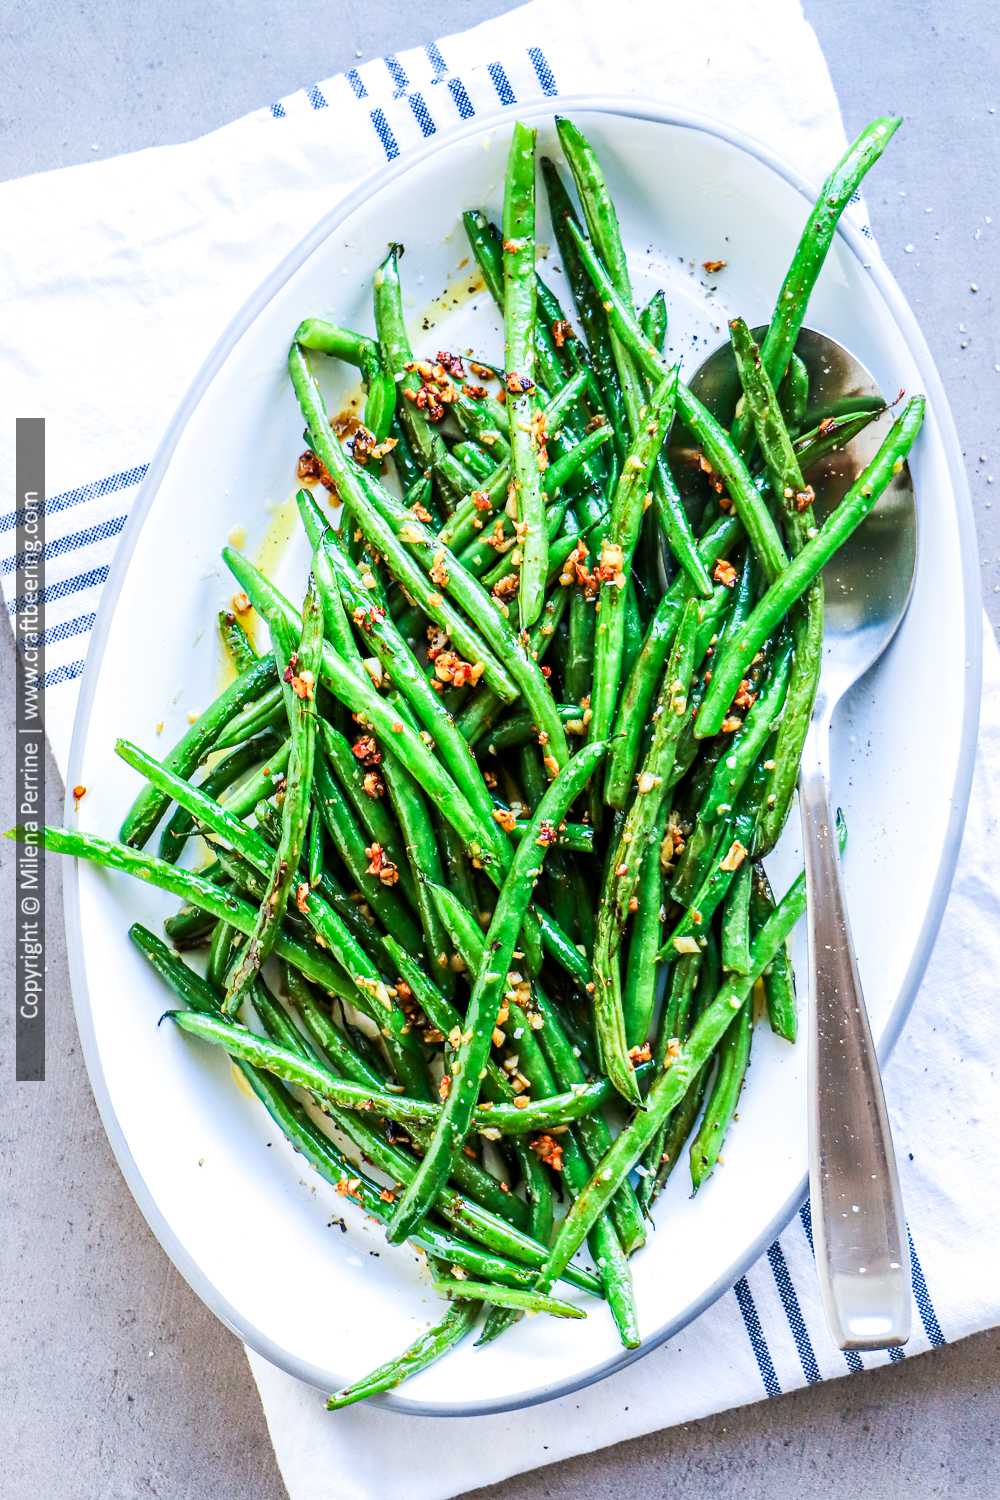 Haricot vert French green beans with garlic.